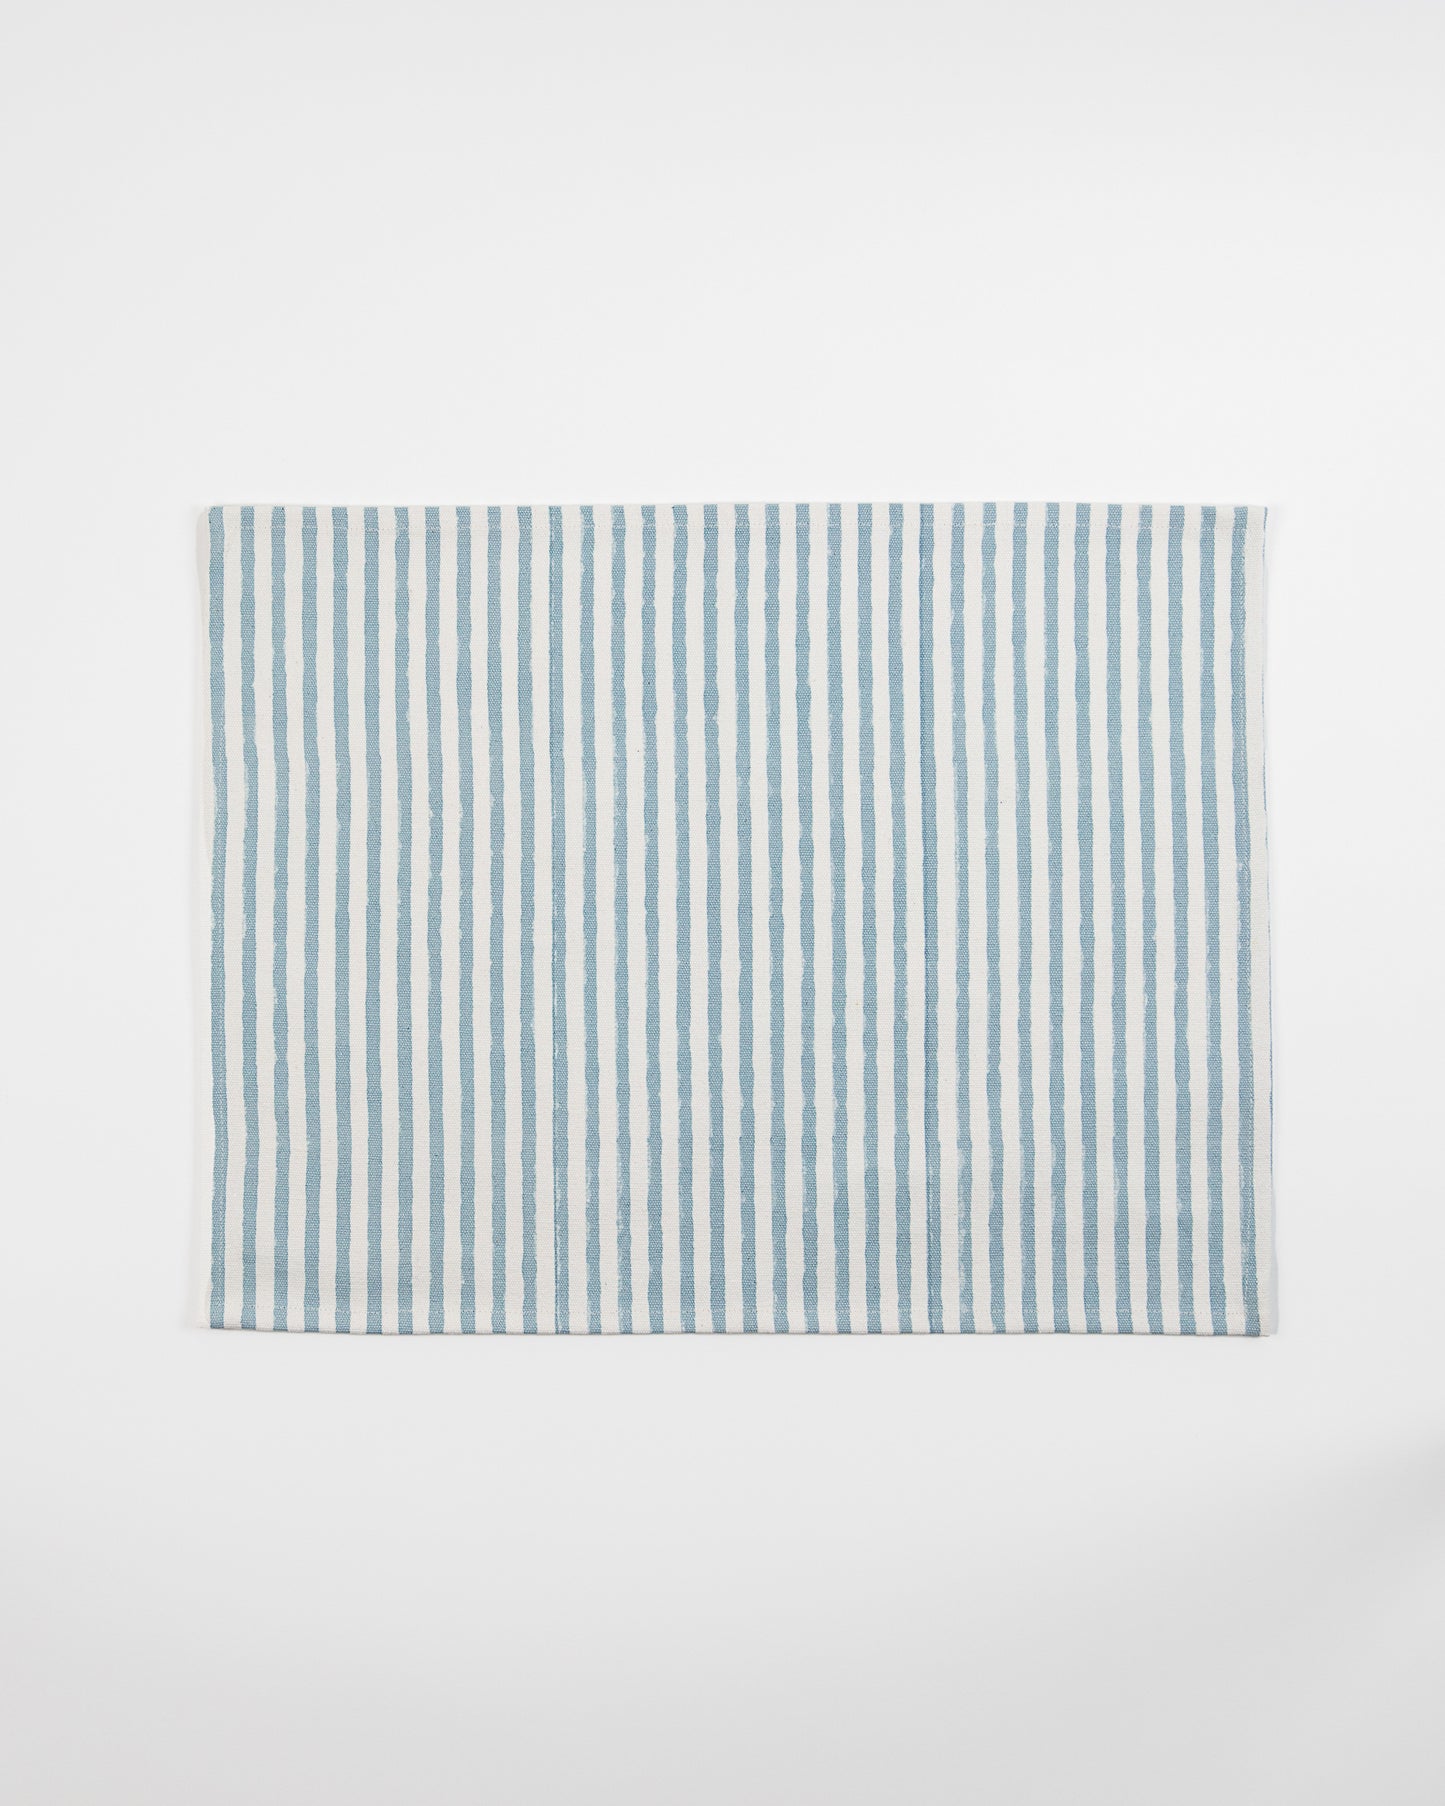 Block Printed Cotton Striped Table Mat in Duck Egg Blue